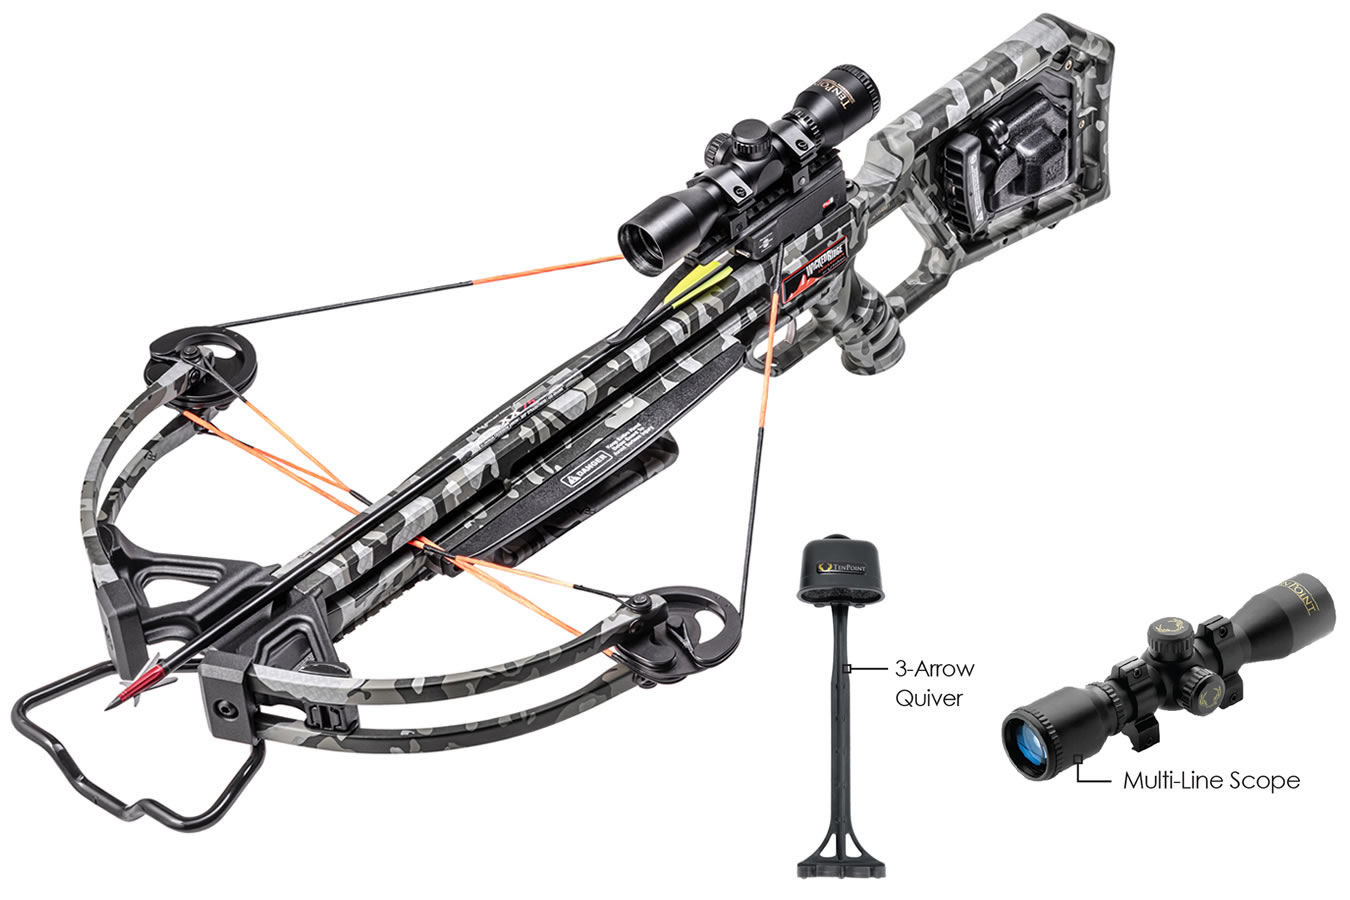 RAMPAGE 360 ACU DRAW 50 CROSSBOW PACKAGE